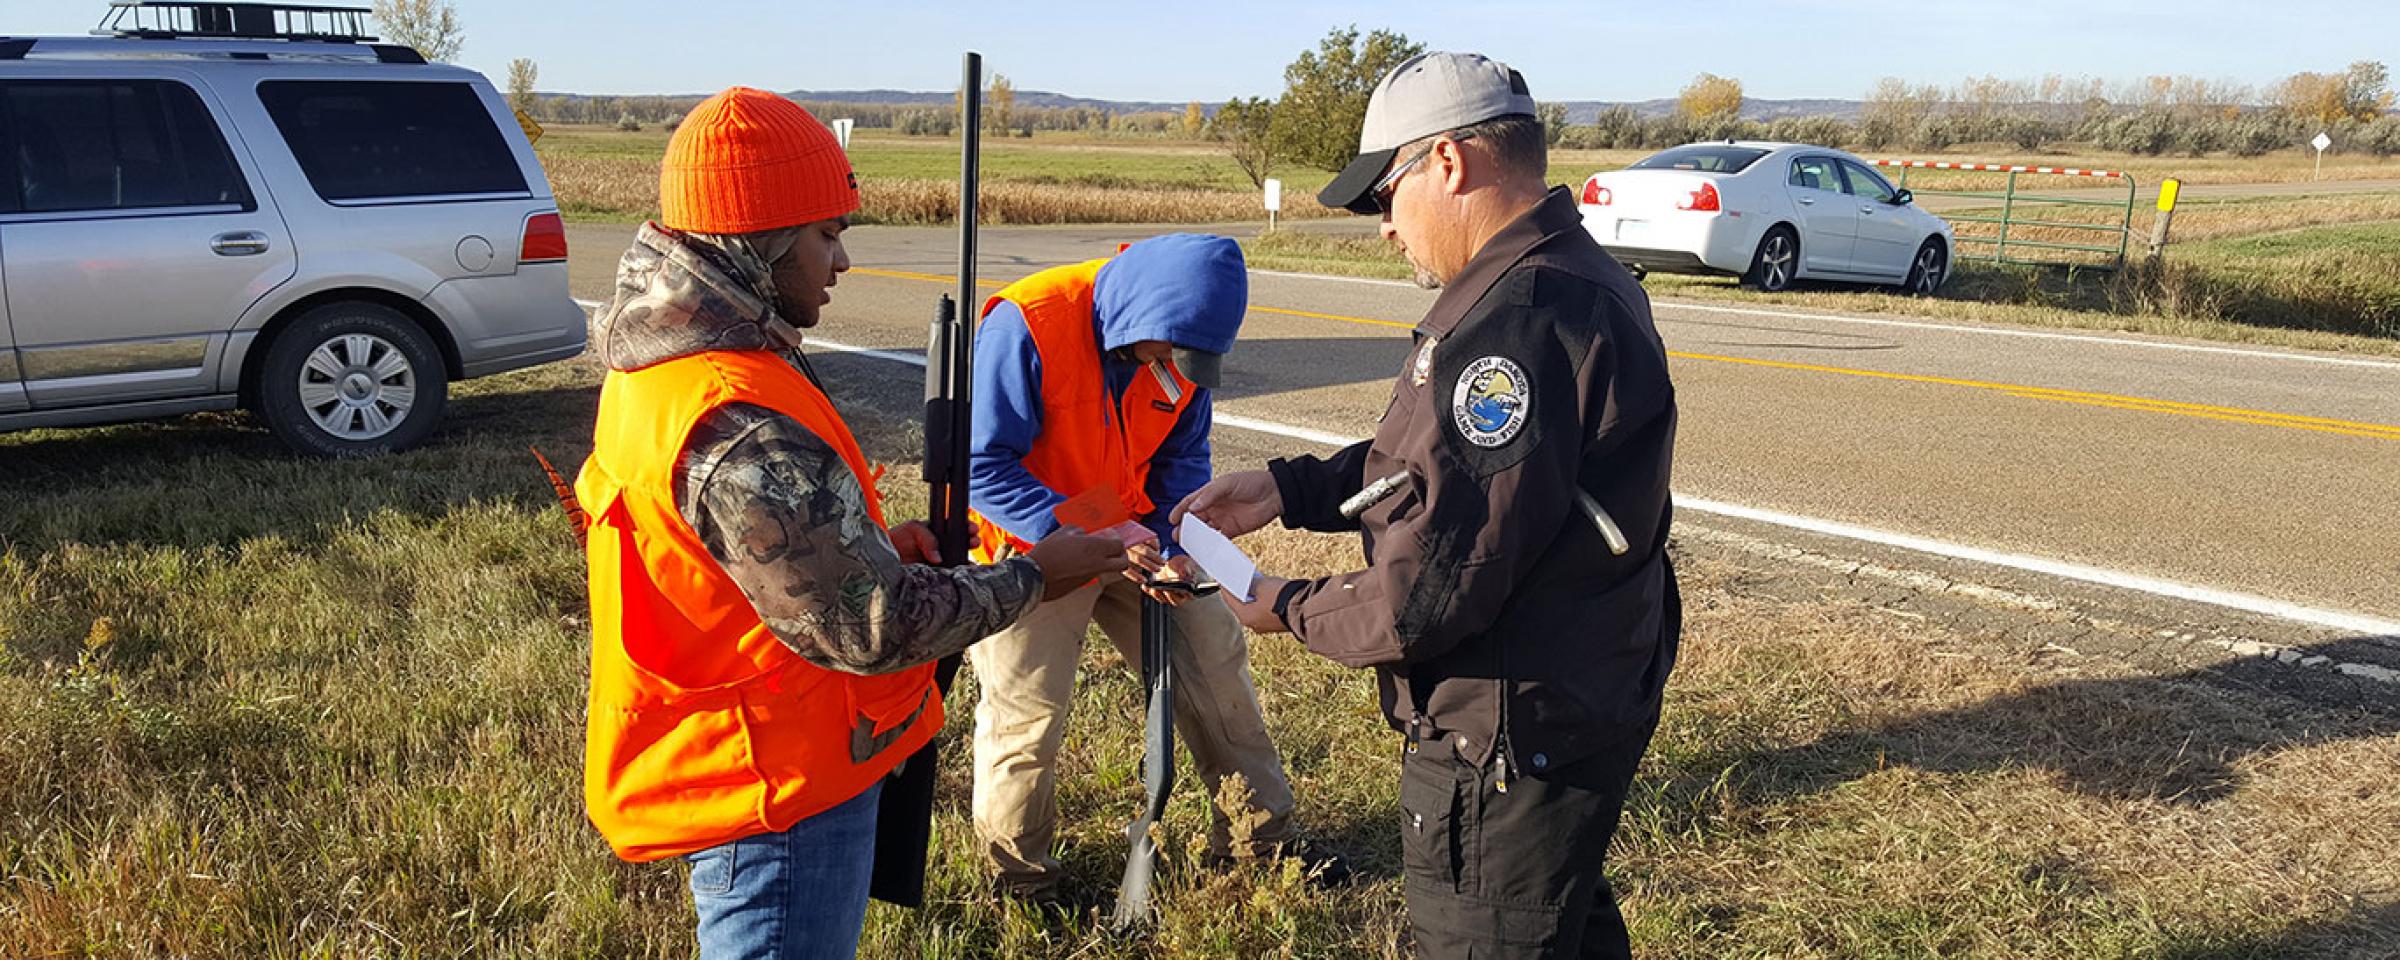 Warden checking licenses in the field